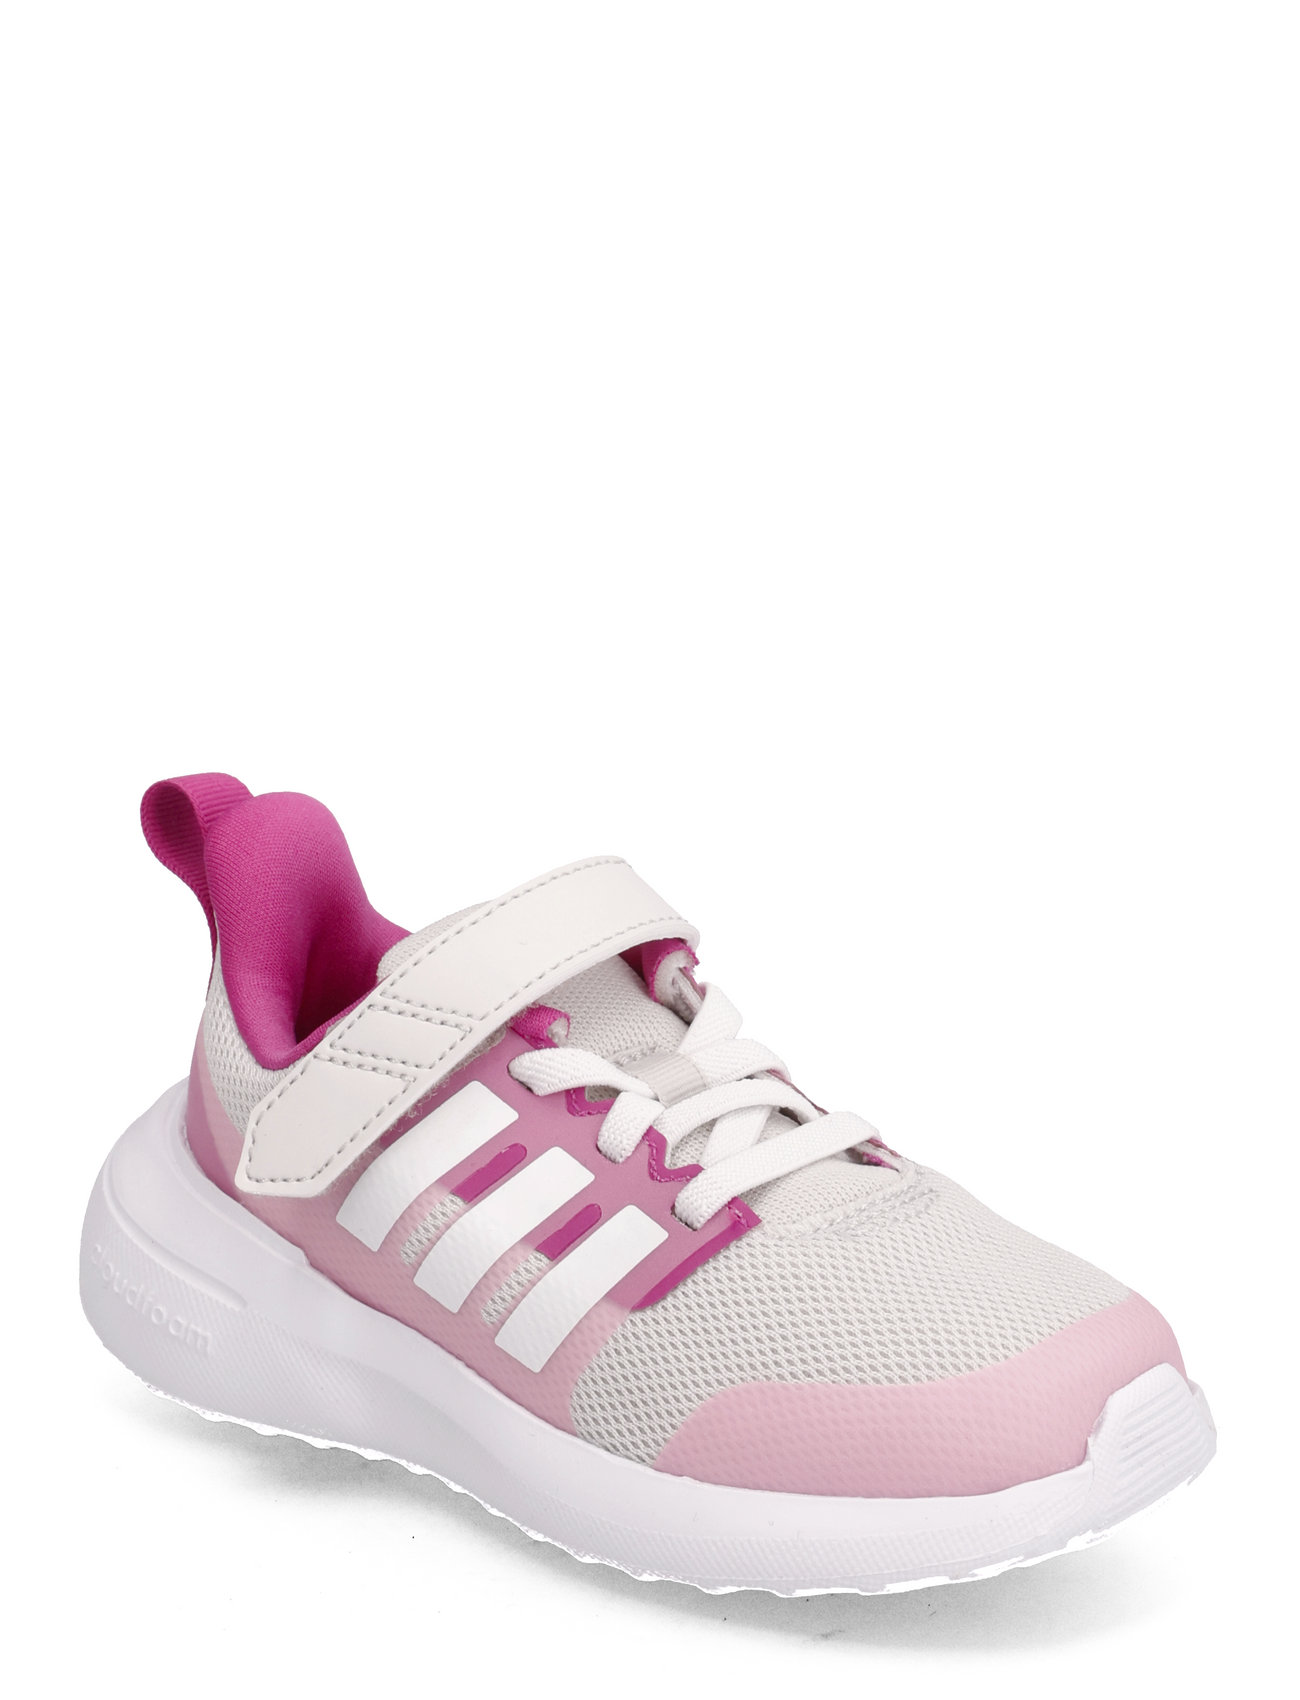 Stevig verhaal Zilver adidas Performance Fortarun 2.0 El I (Greone/ftwwht/beampk), (30.38 €) |  Large selection of outlet-styles | Booztlet.com